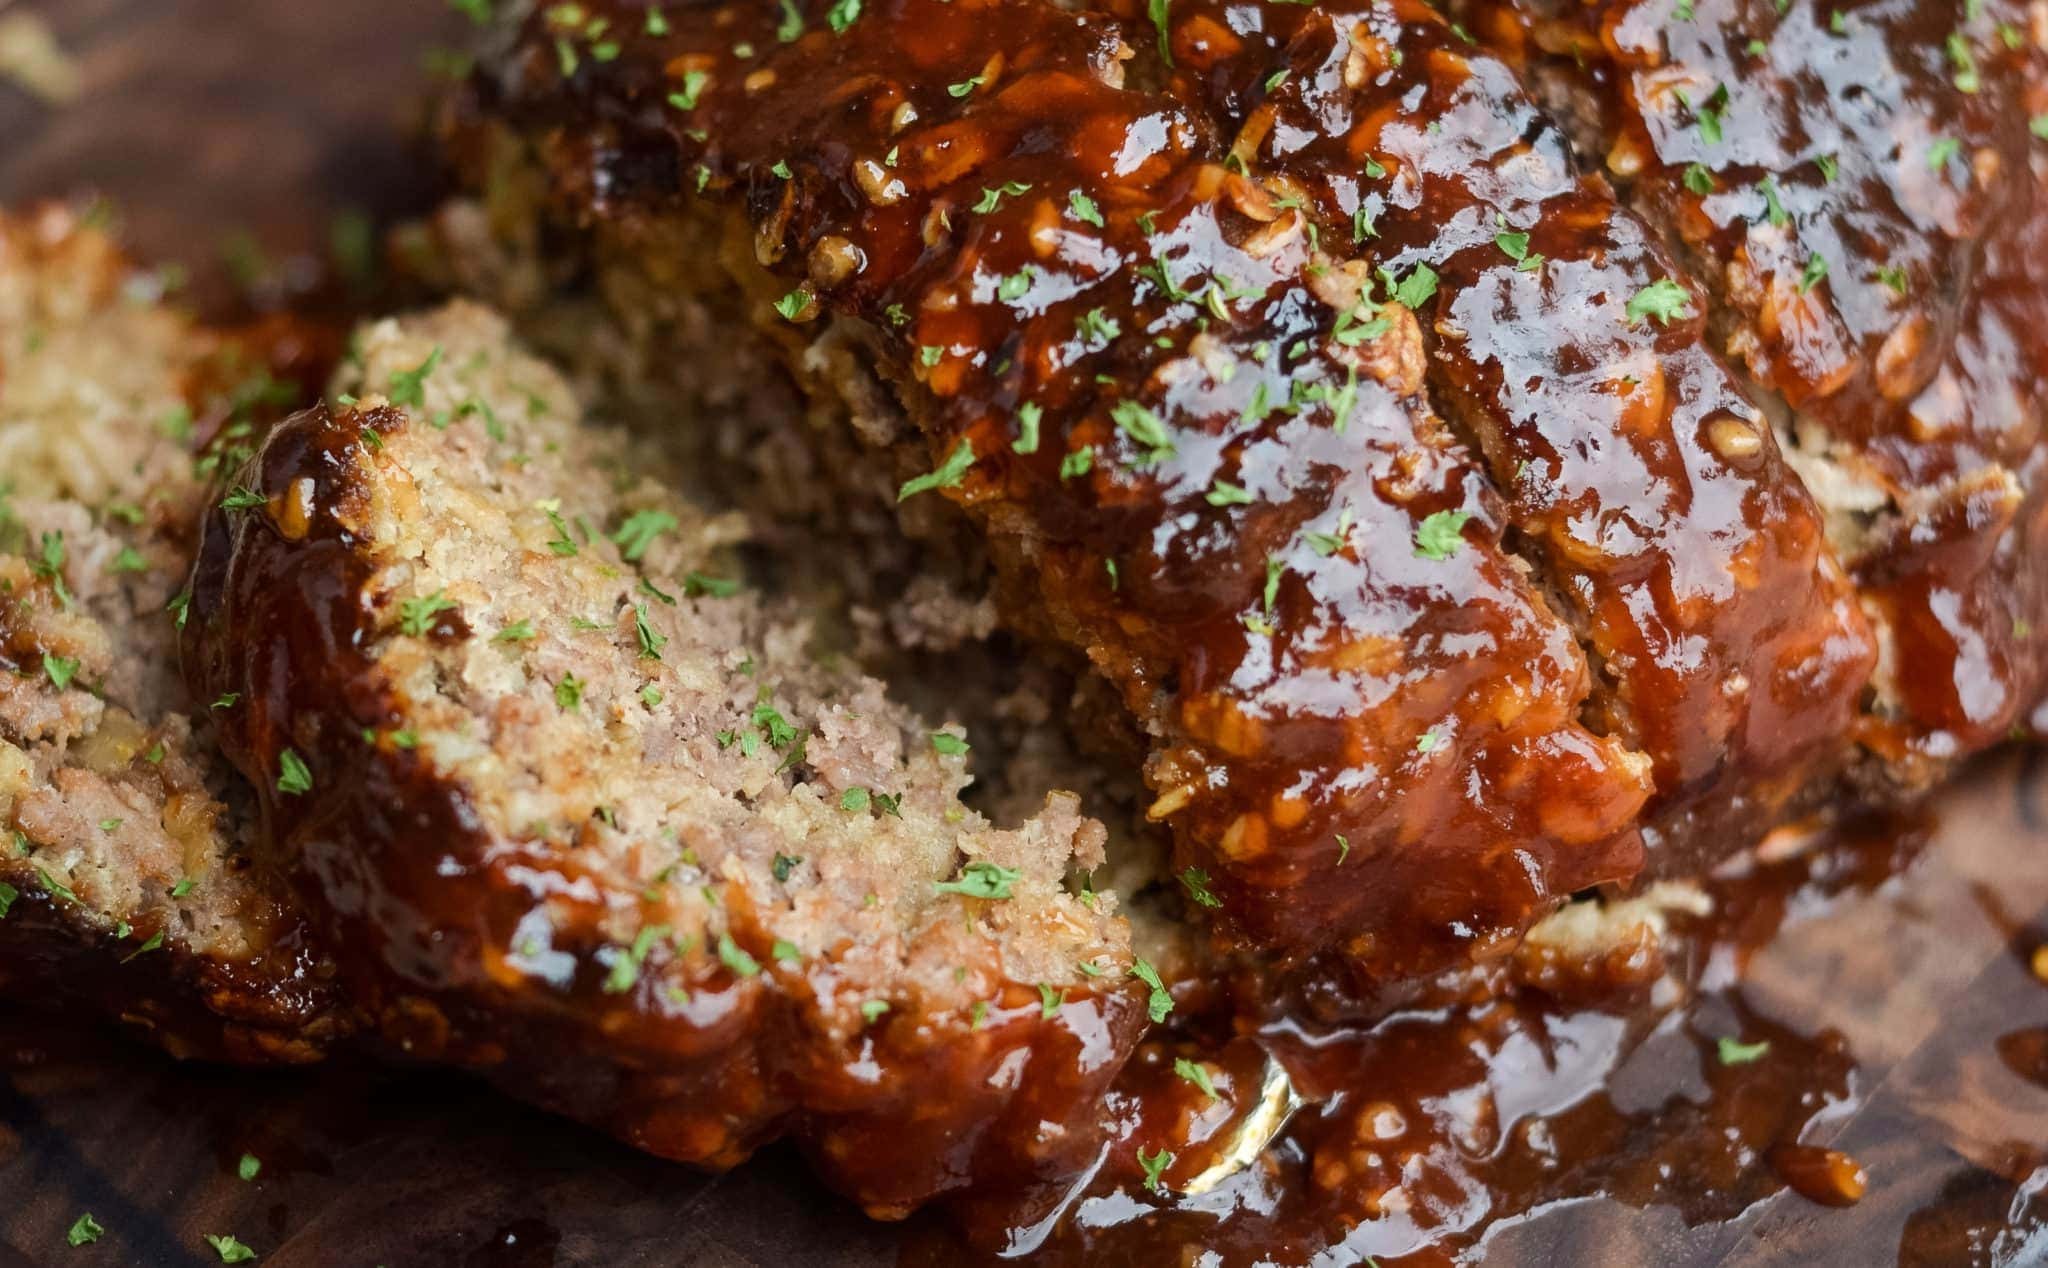 Meatloaf made in the Ninja Foodi Grill